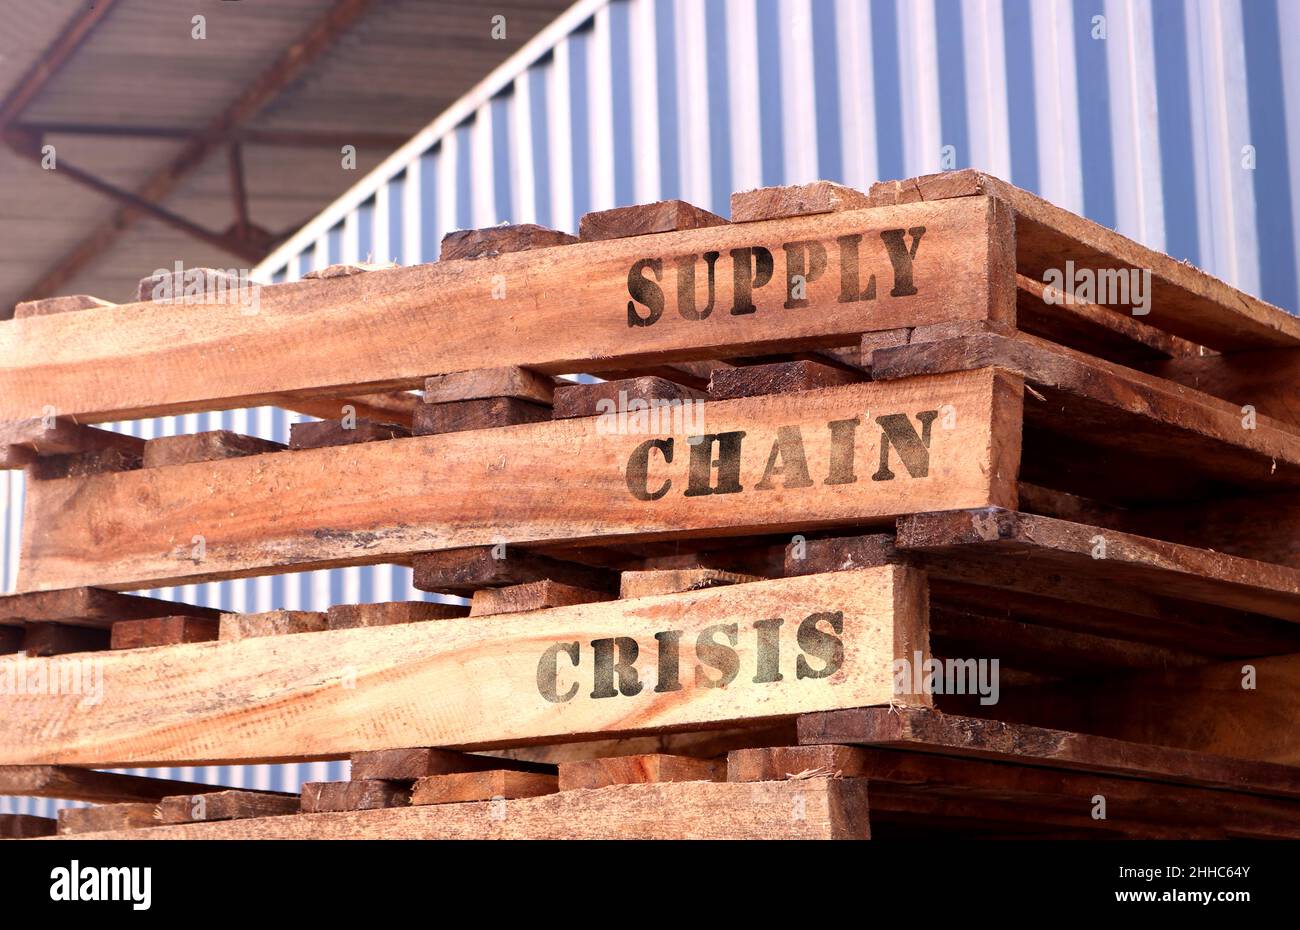 'Supply Chain Crisis', text written on piled up pallets. Supply chain concept. Logistics concept. Coronavirus (COVID-19) effect. Stock Photo